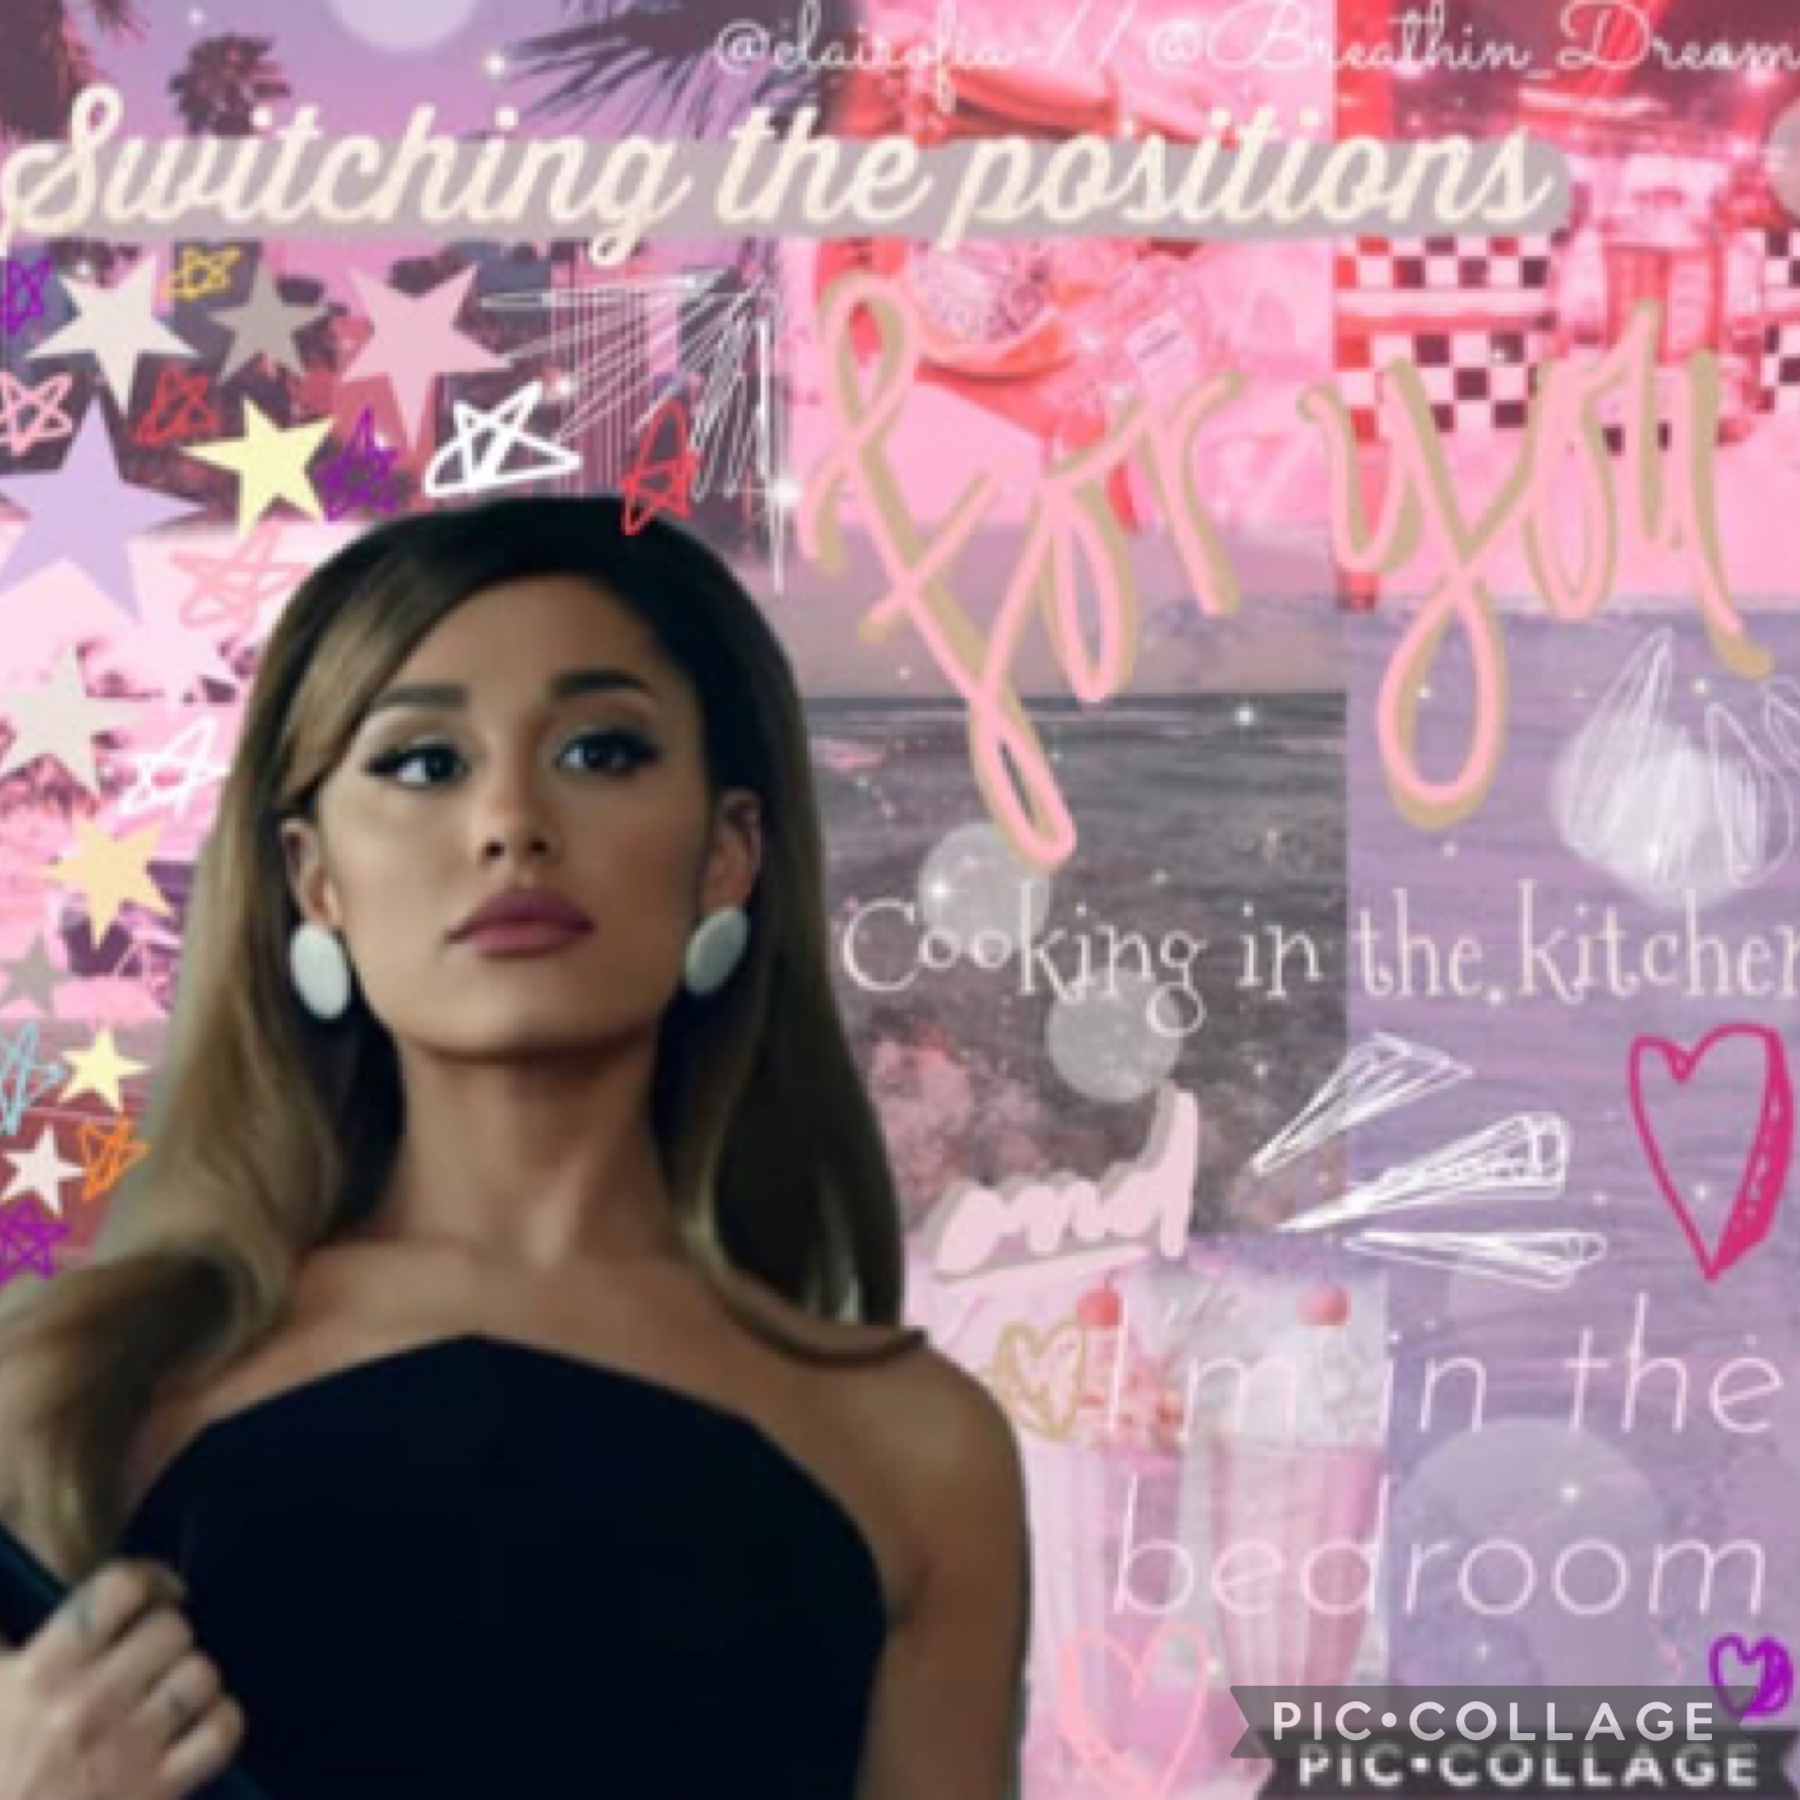 12.2.22 Positions Ariana Grande collage part 2 collaboration with clairofia-